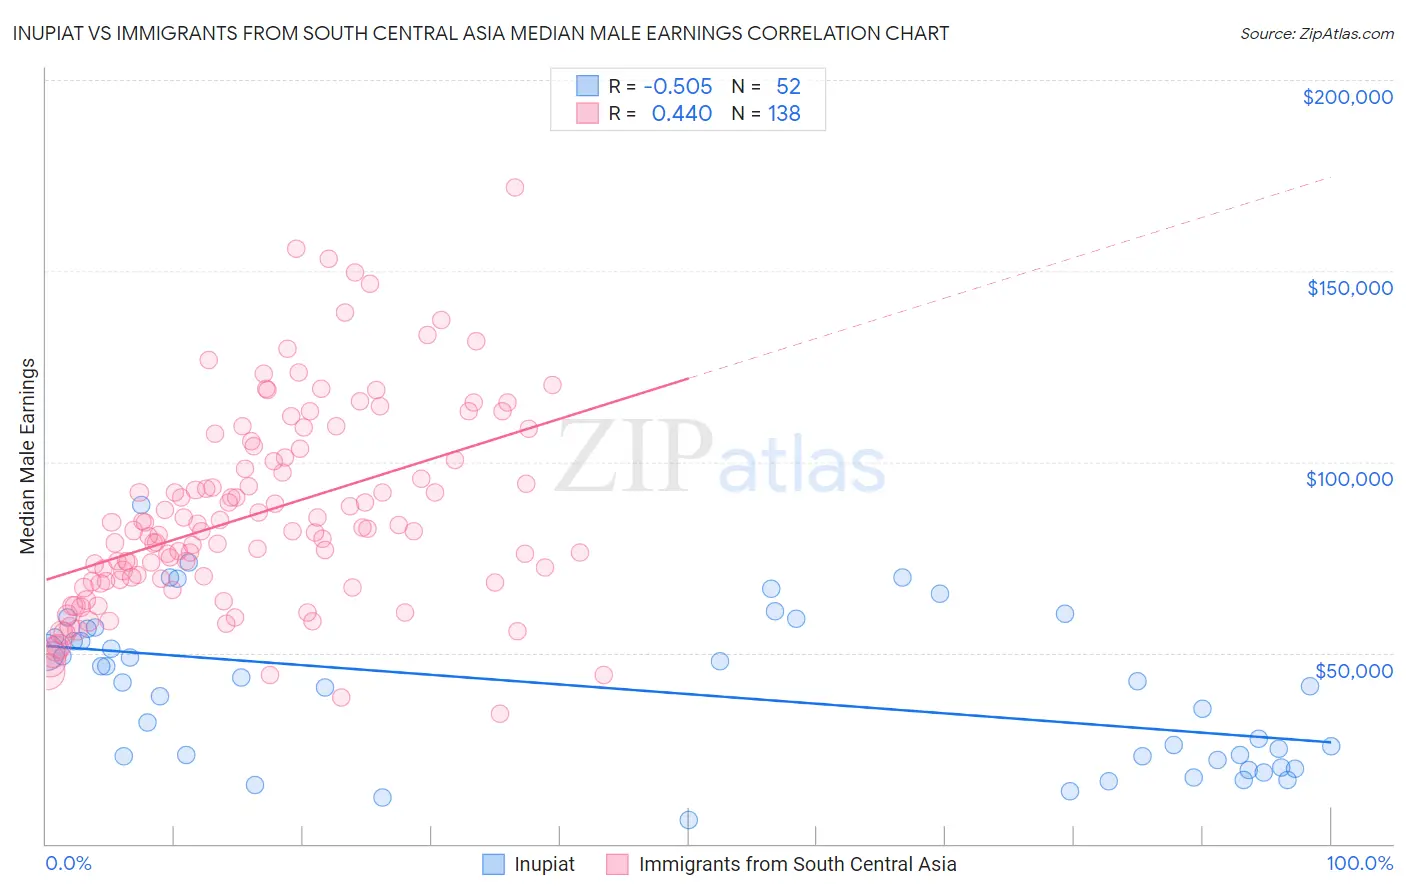 Inupiat vs Immigrants from South Central Asia Median Male Earnings